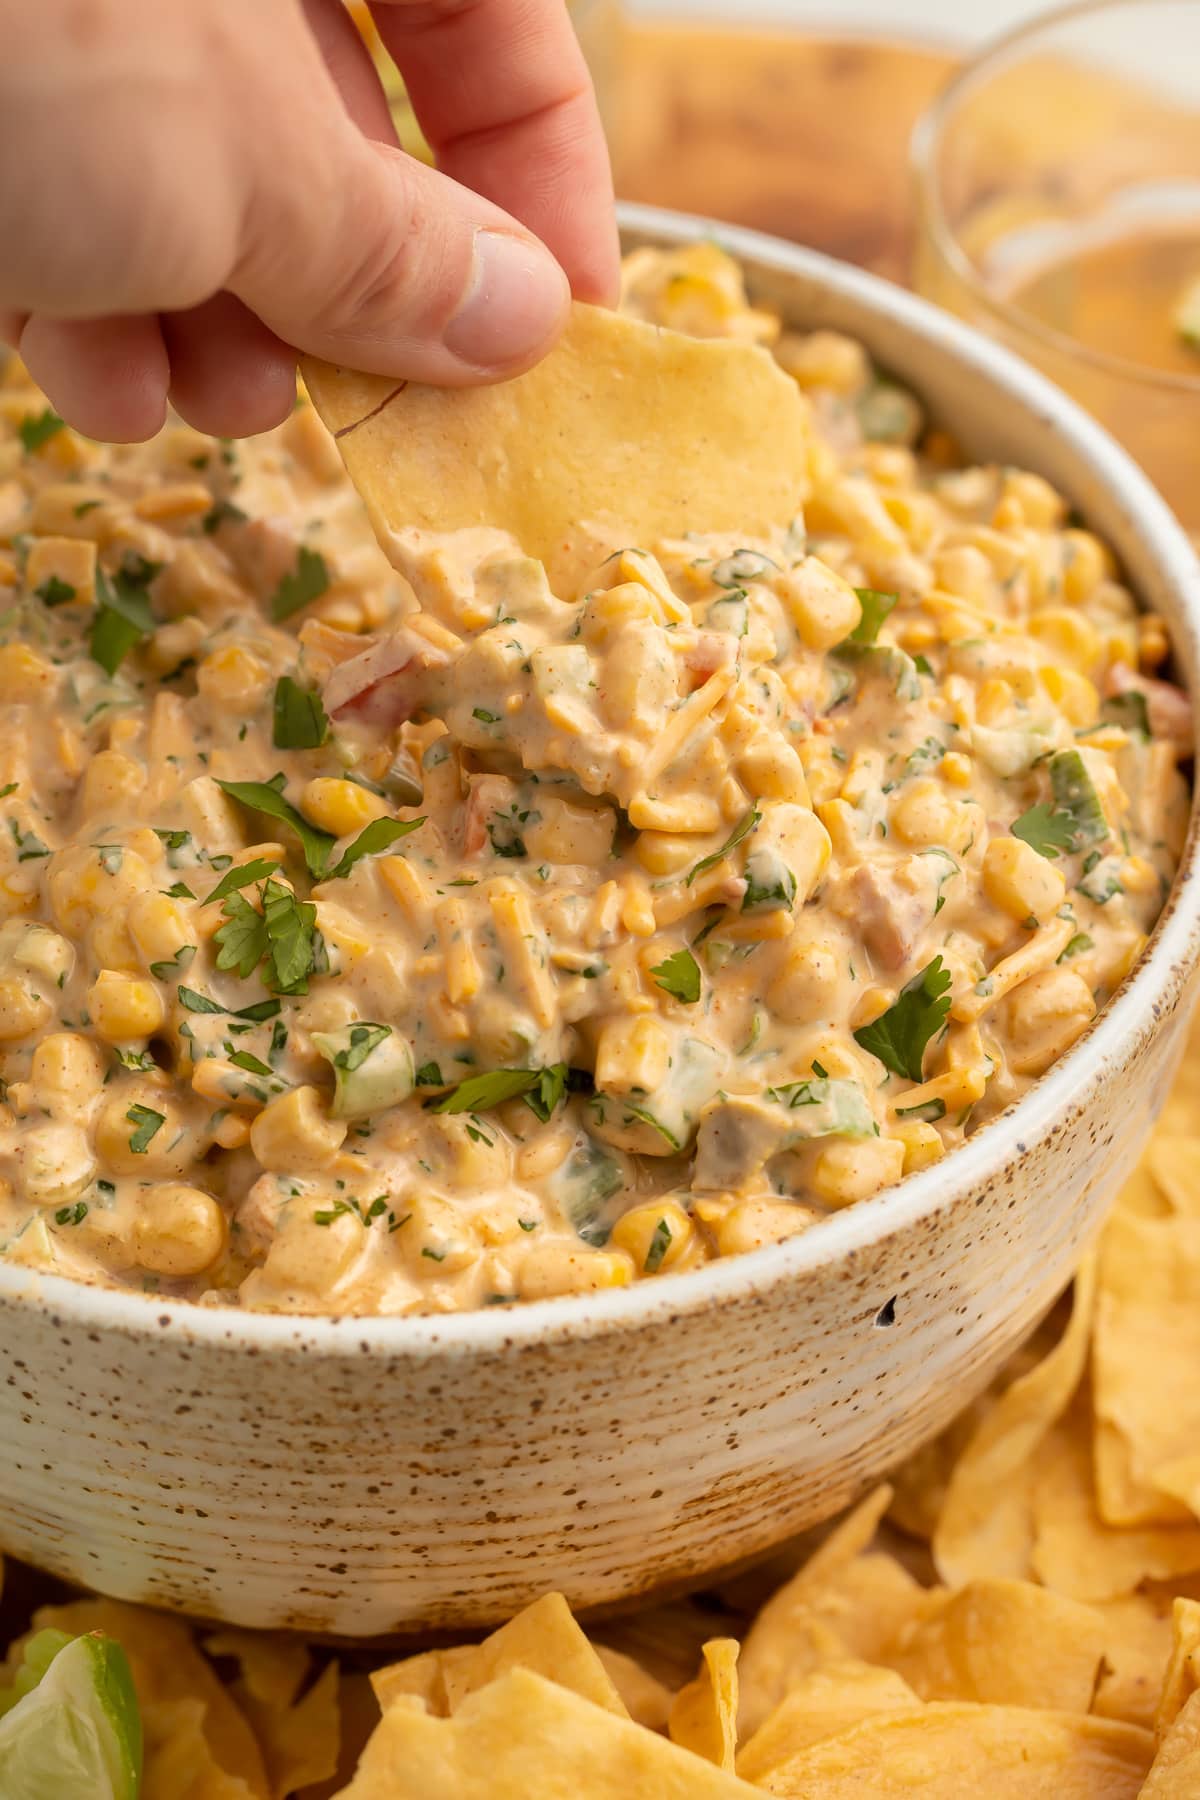 A white woman's hand using a corn chip to scoop a serving of Mexican corn dip out of a bowl.